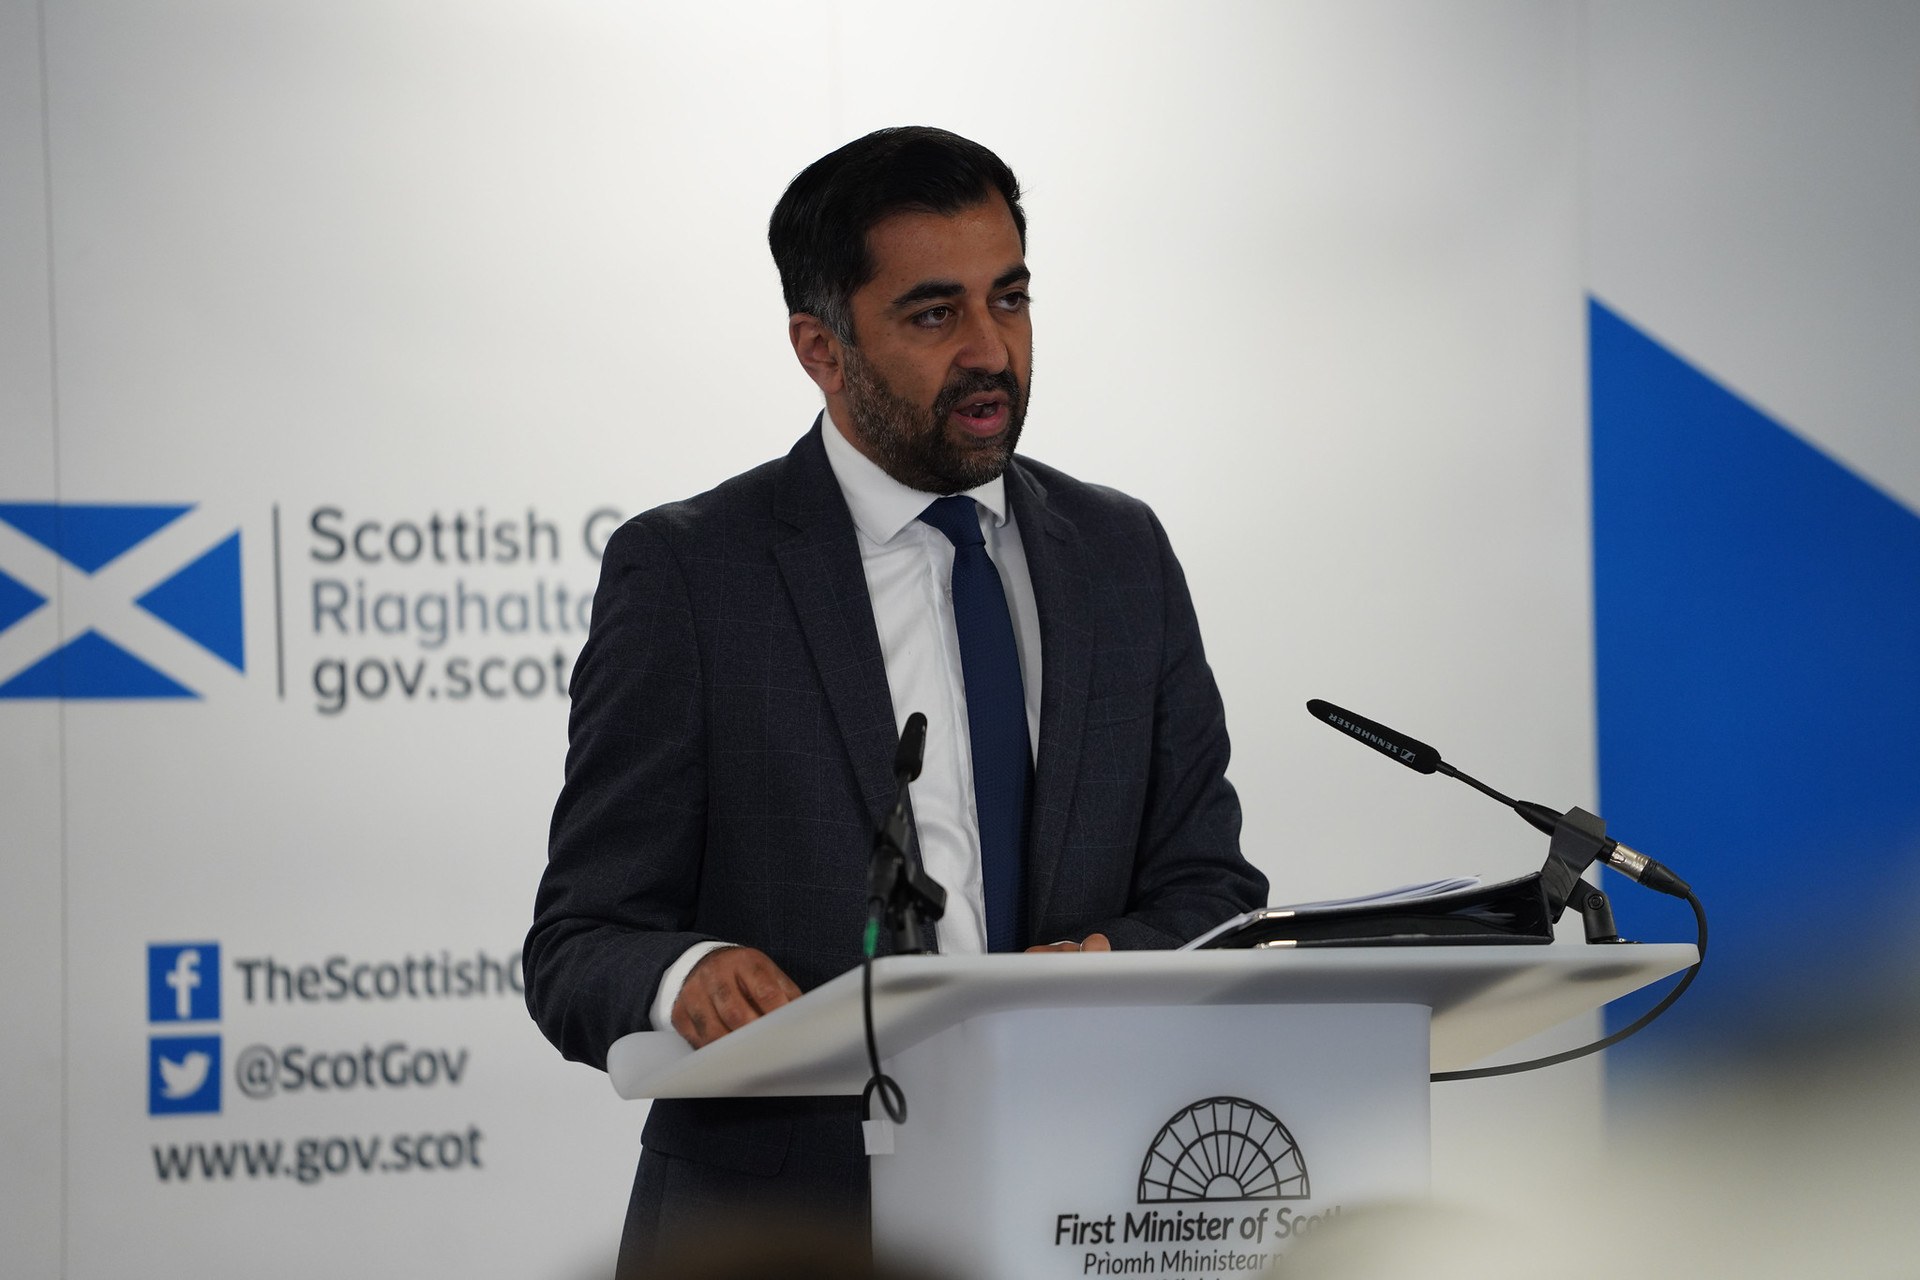 Humza Yousaf continued his calls for a ceasefire between Israel and Hamas.